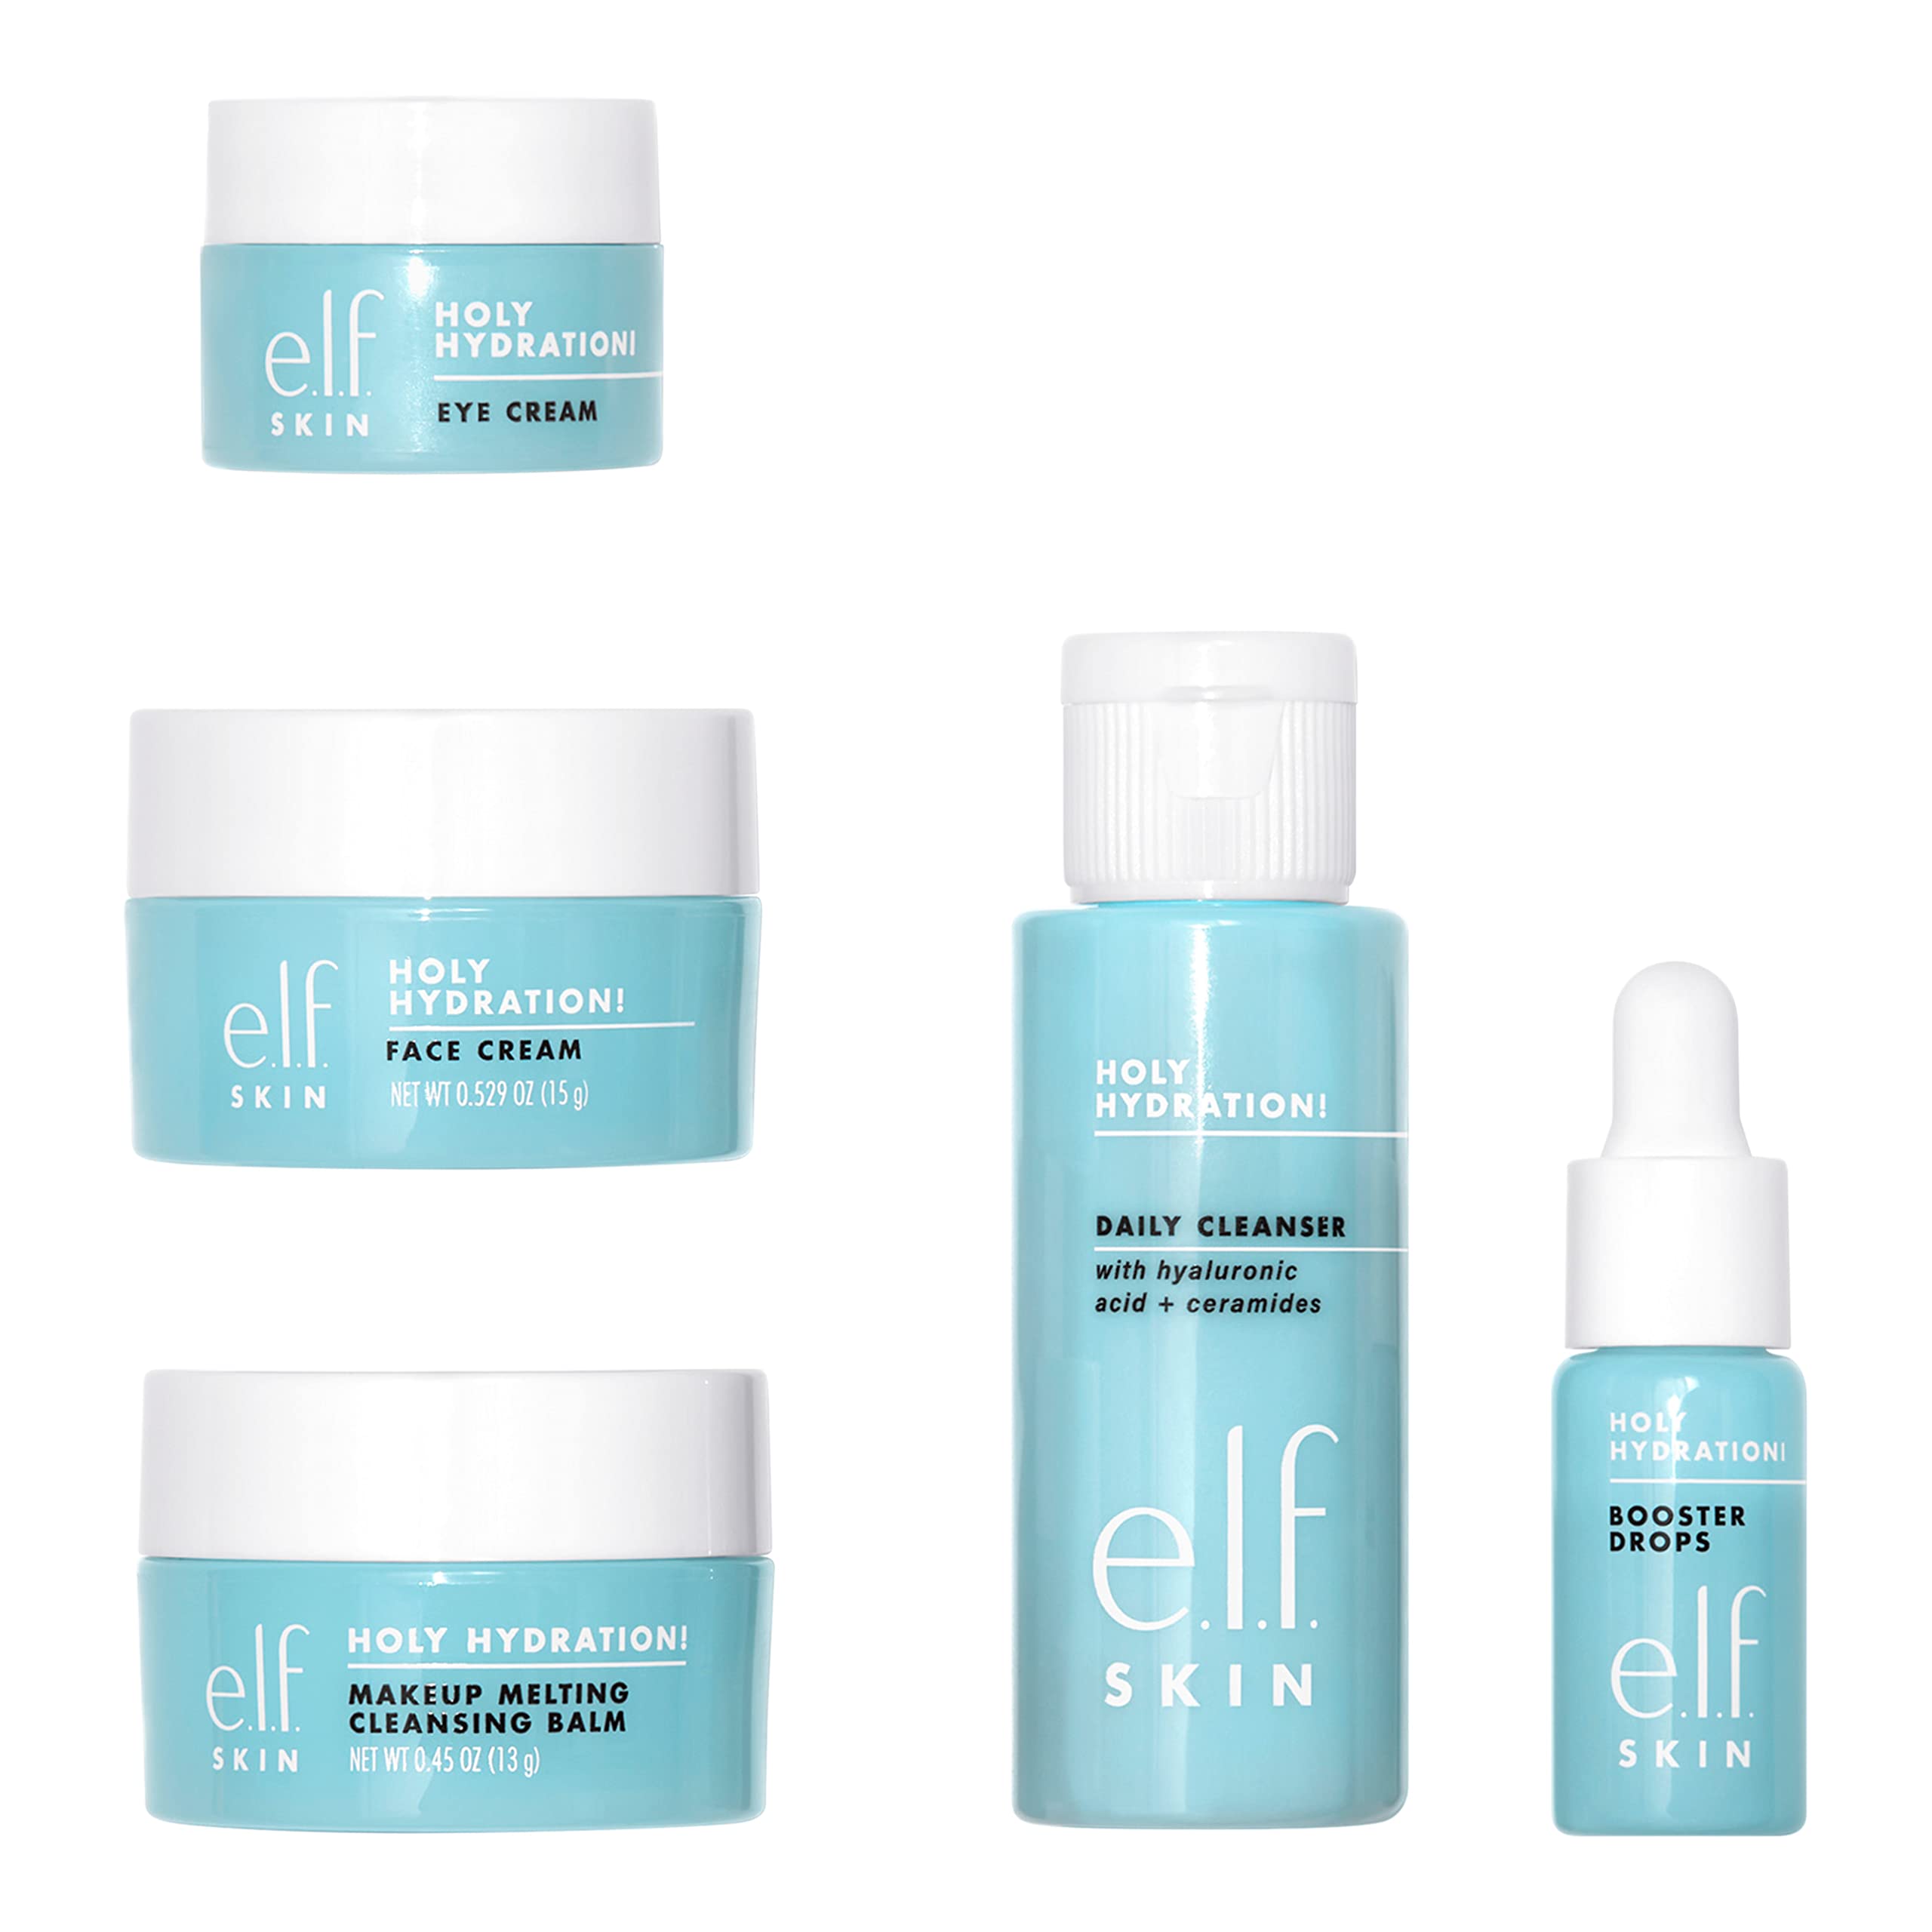 e.l.f.SKIN Hydrated Ever After Skincare Mini Kit, Cleanser, Makeup Remover, Moisturizer & Eye Cream For Hydrating Skin, TSA-friendly Sizes